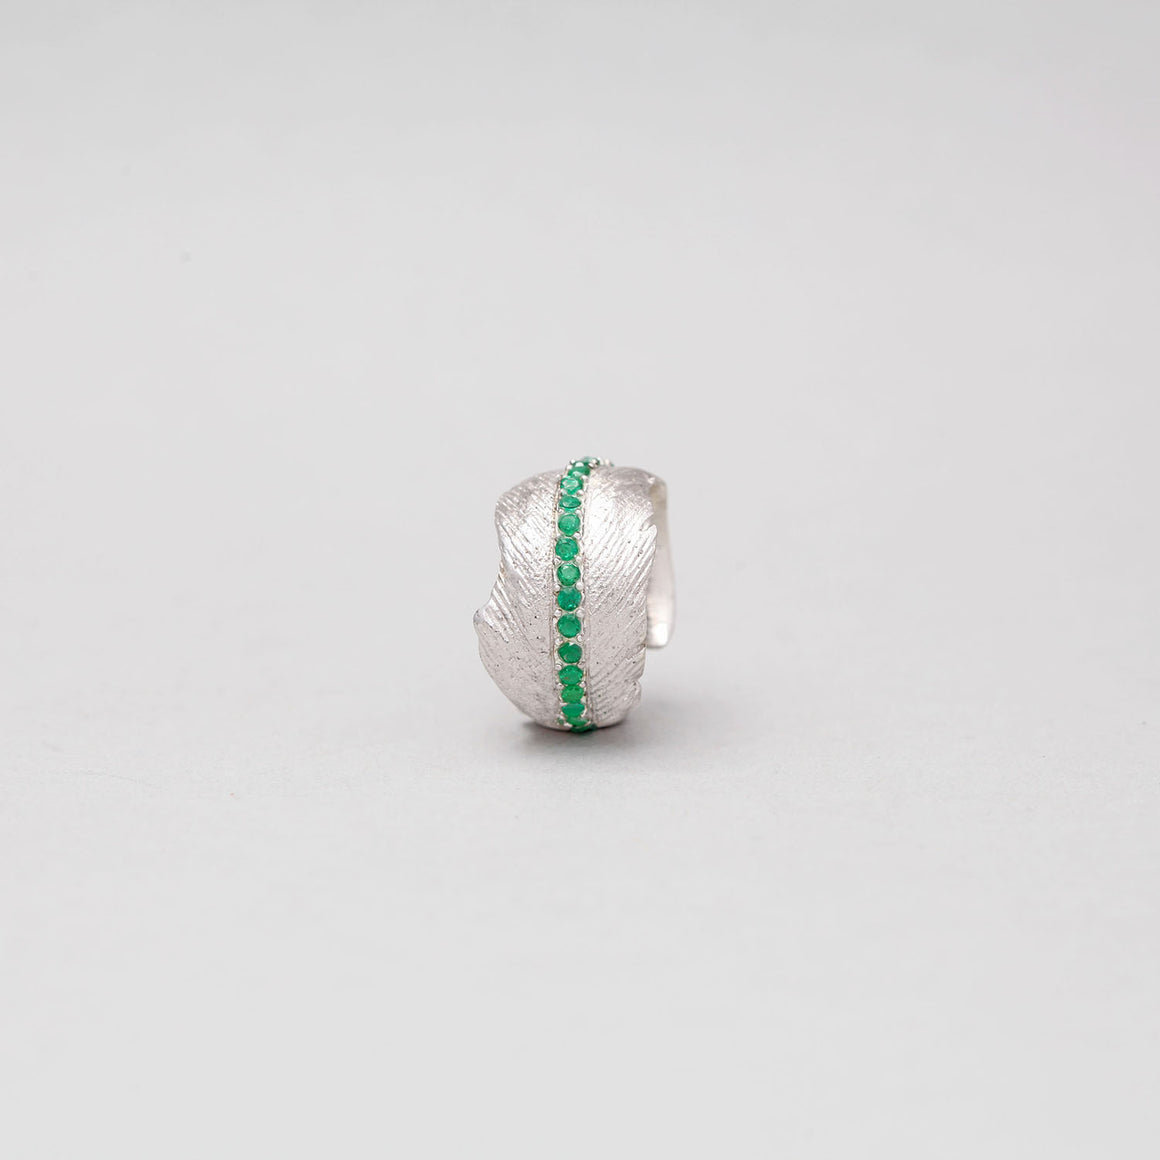 WHITE BRASS FEATHER RING WITH COLOMBIAN EMERALD